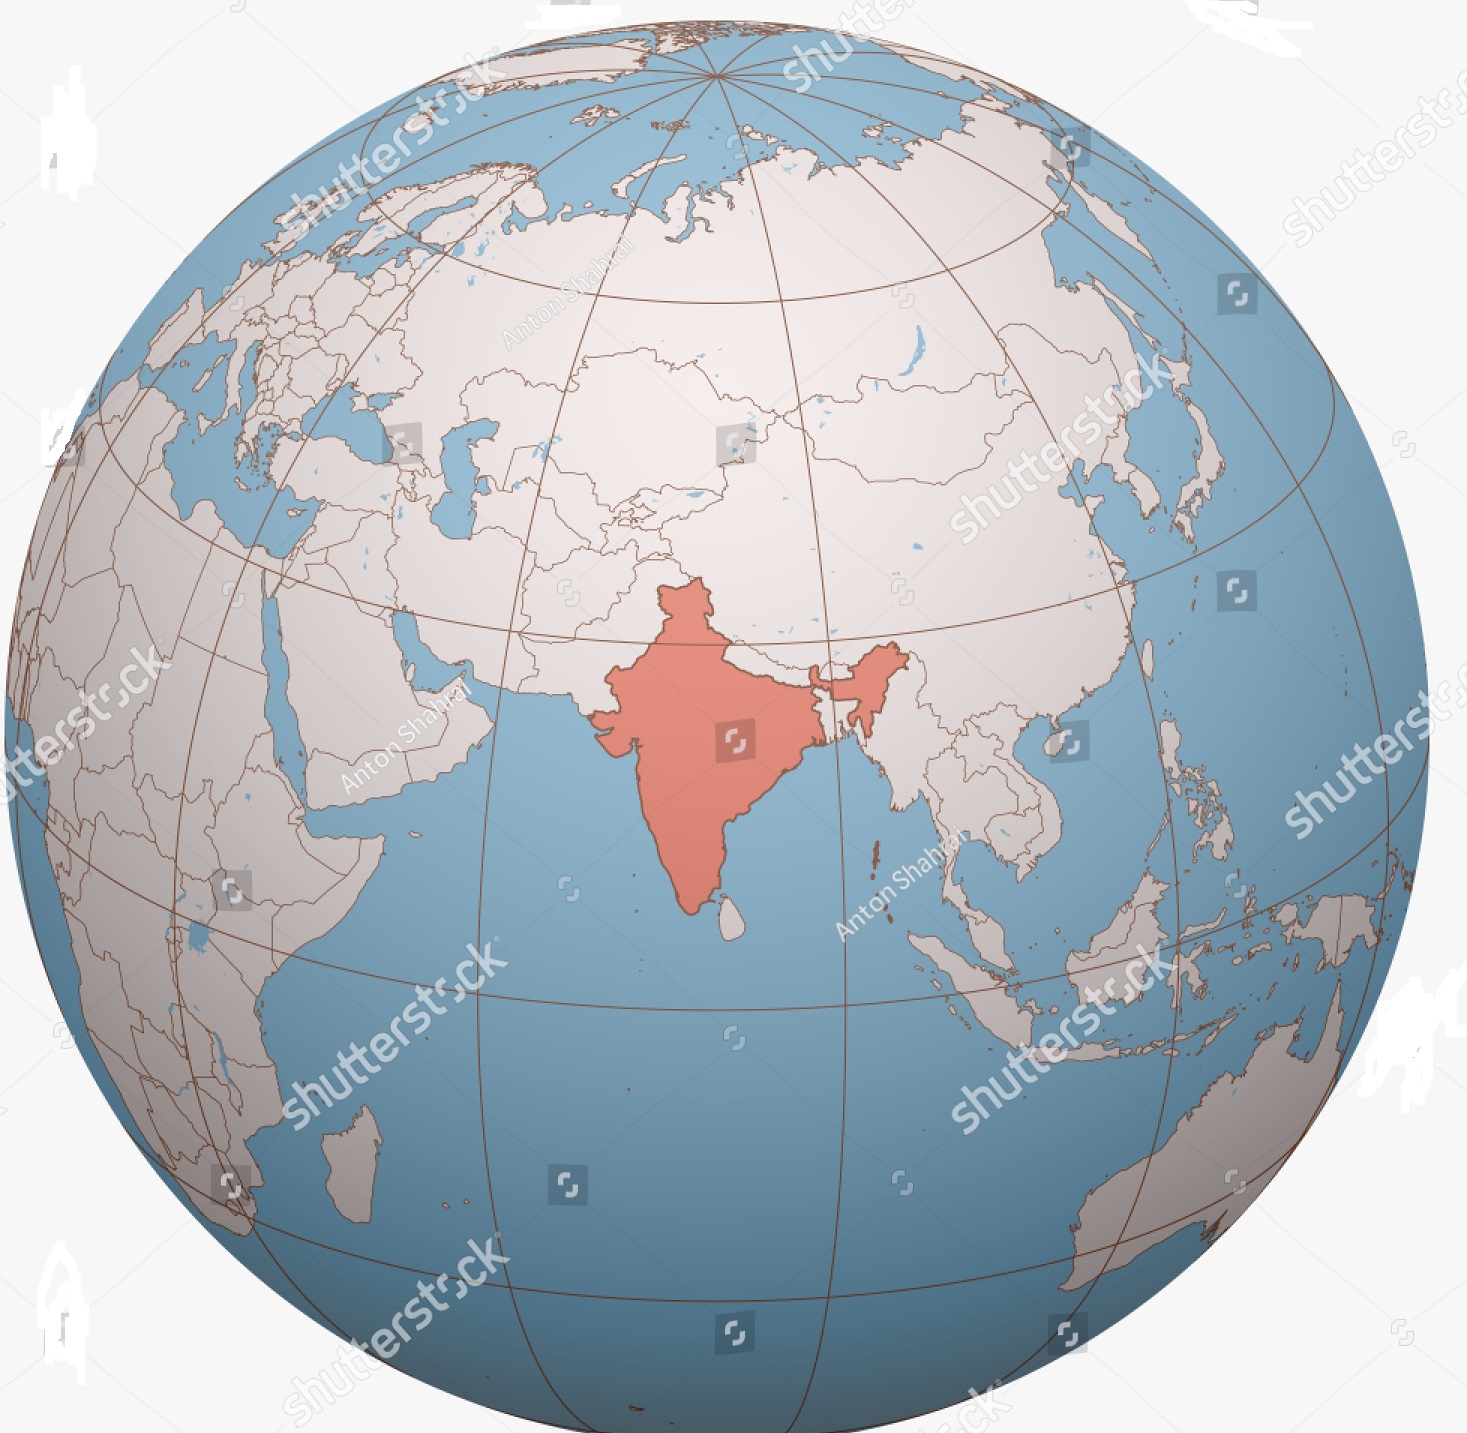 WBBSE Notes For Class 6 Physical Geography Chapter 10 India - Location Of India And Political Divisions Location Of The Indian Golbe